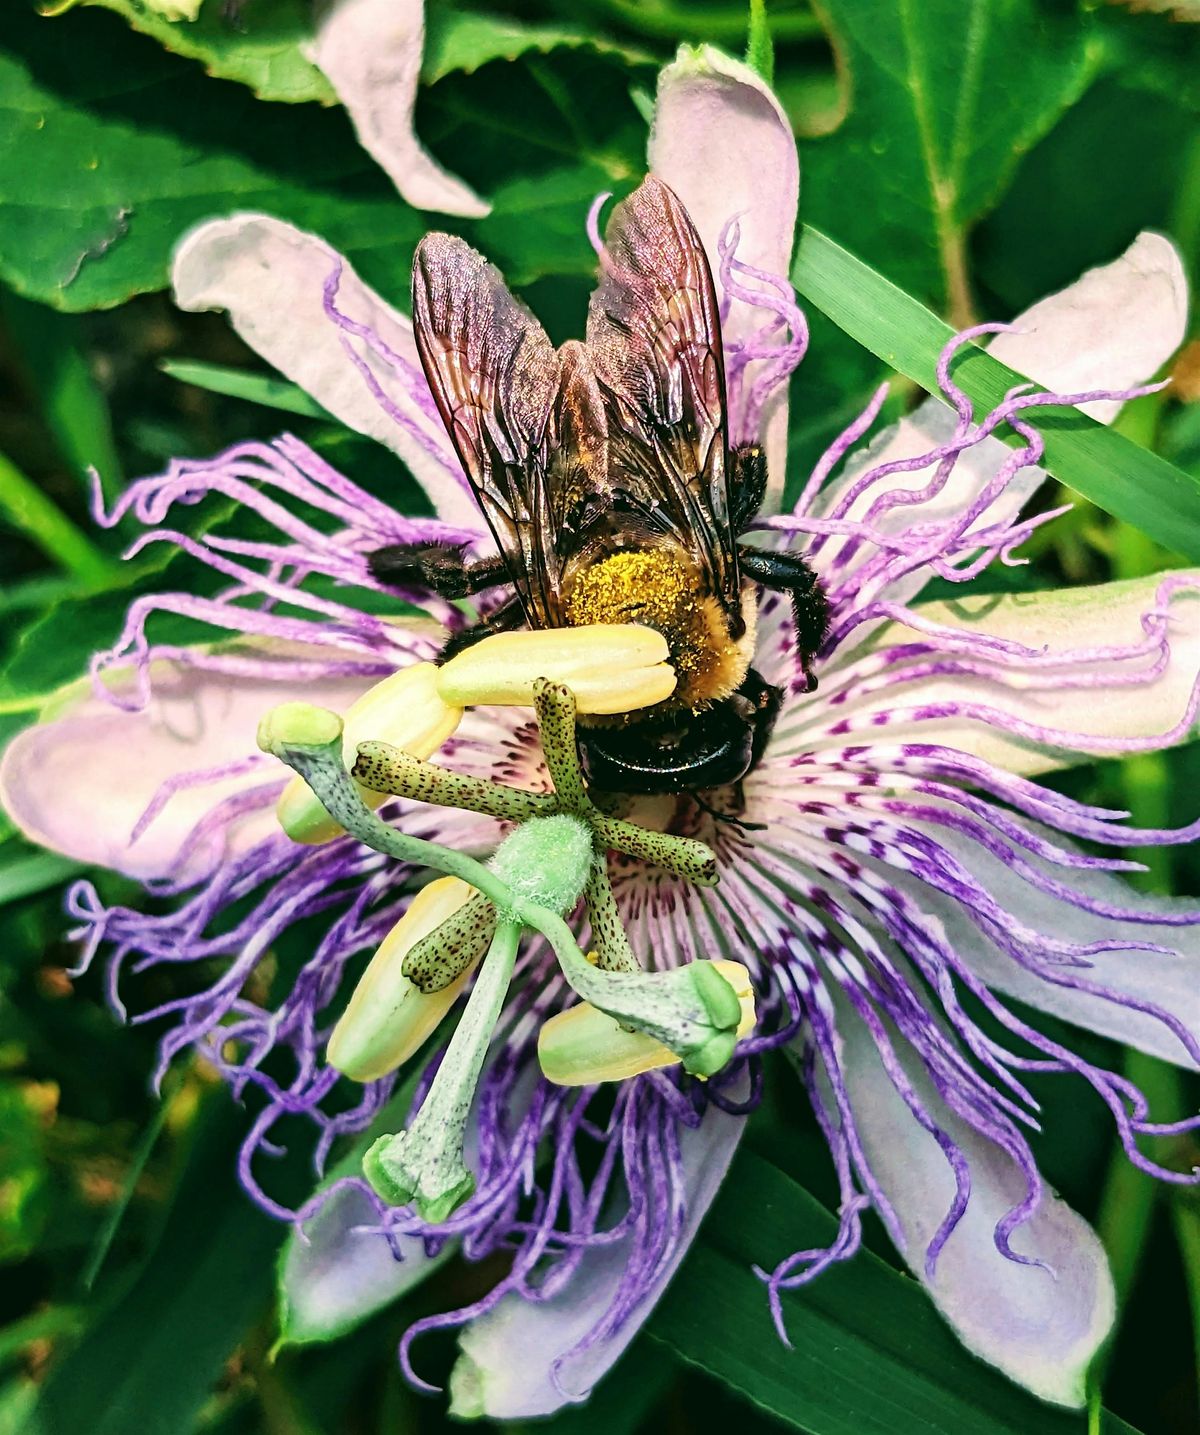 Discovering the Magic of Pollinators